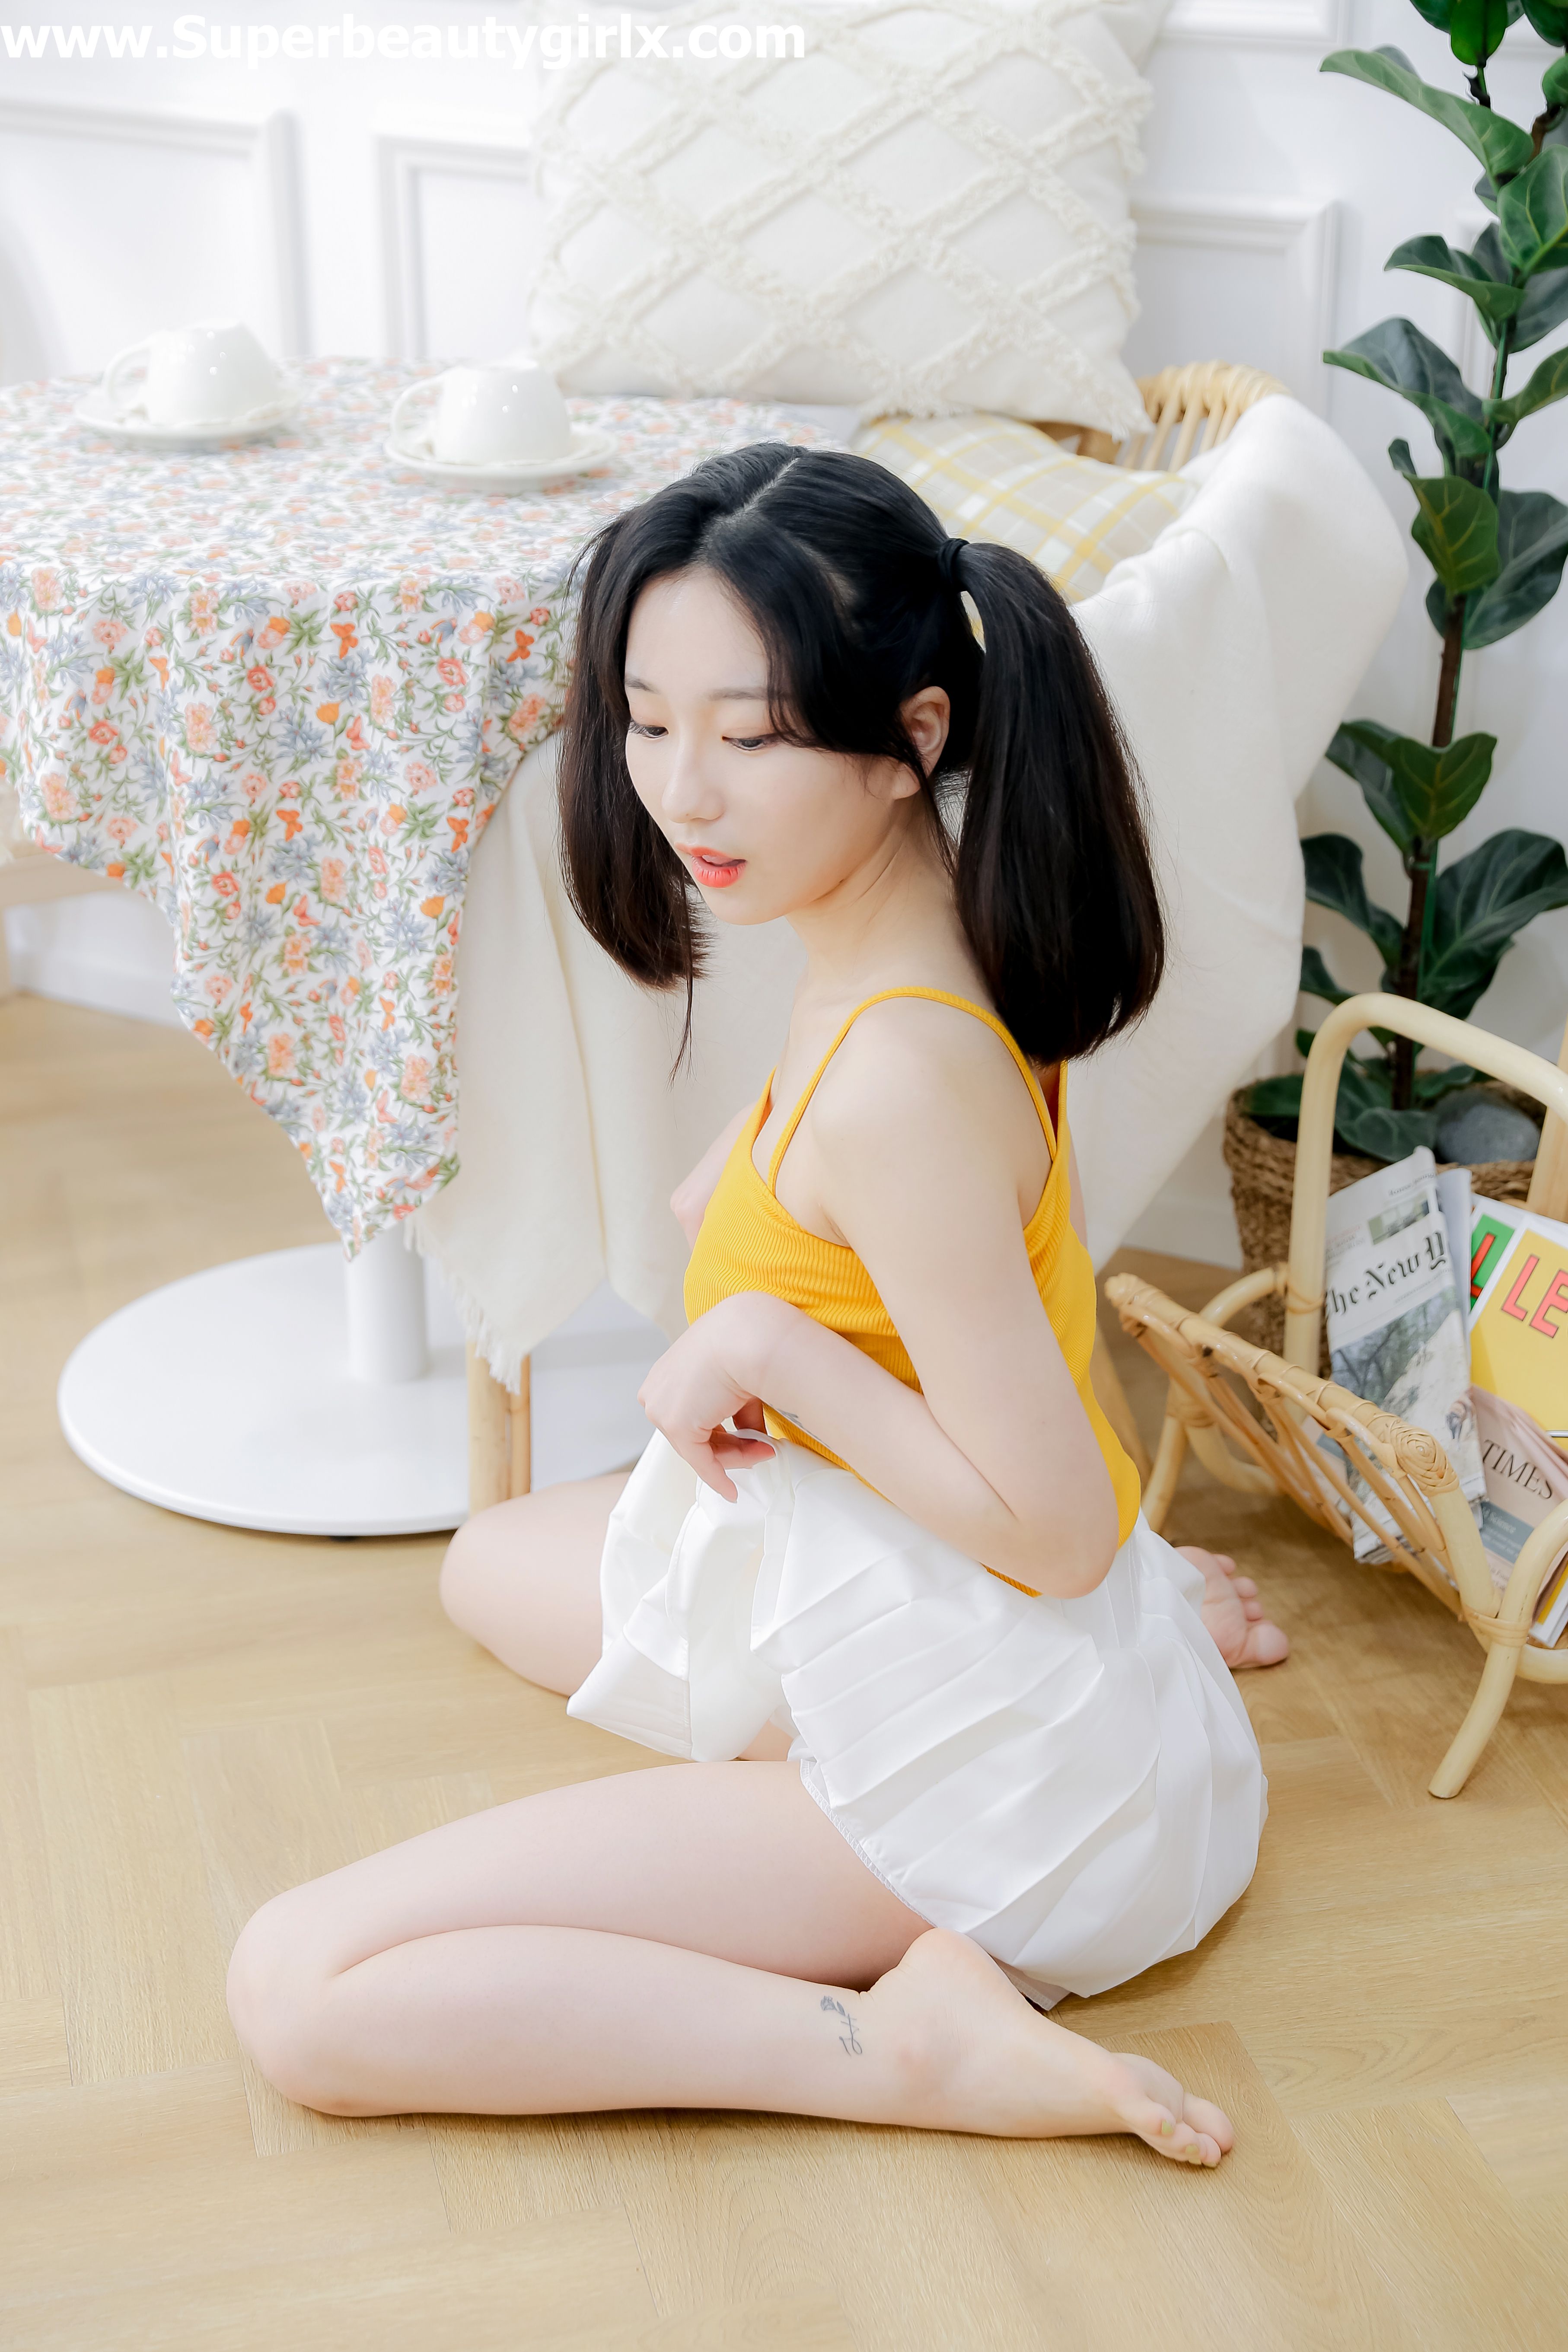 JOApictures-Sehee-x-JOA-21.-MARCH-Vol.2-Superbeautygirlx.top